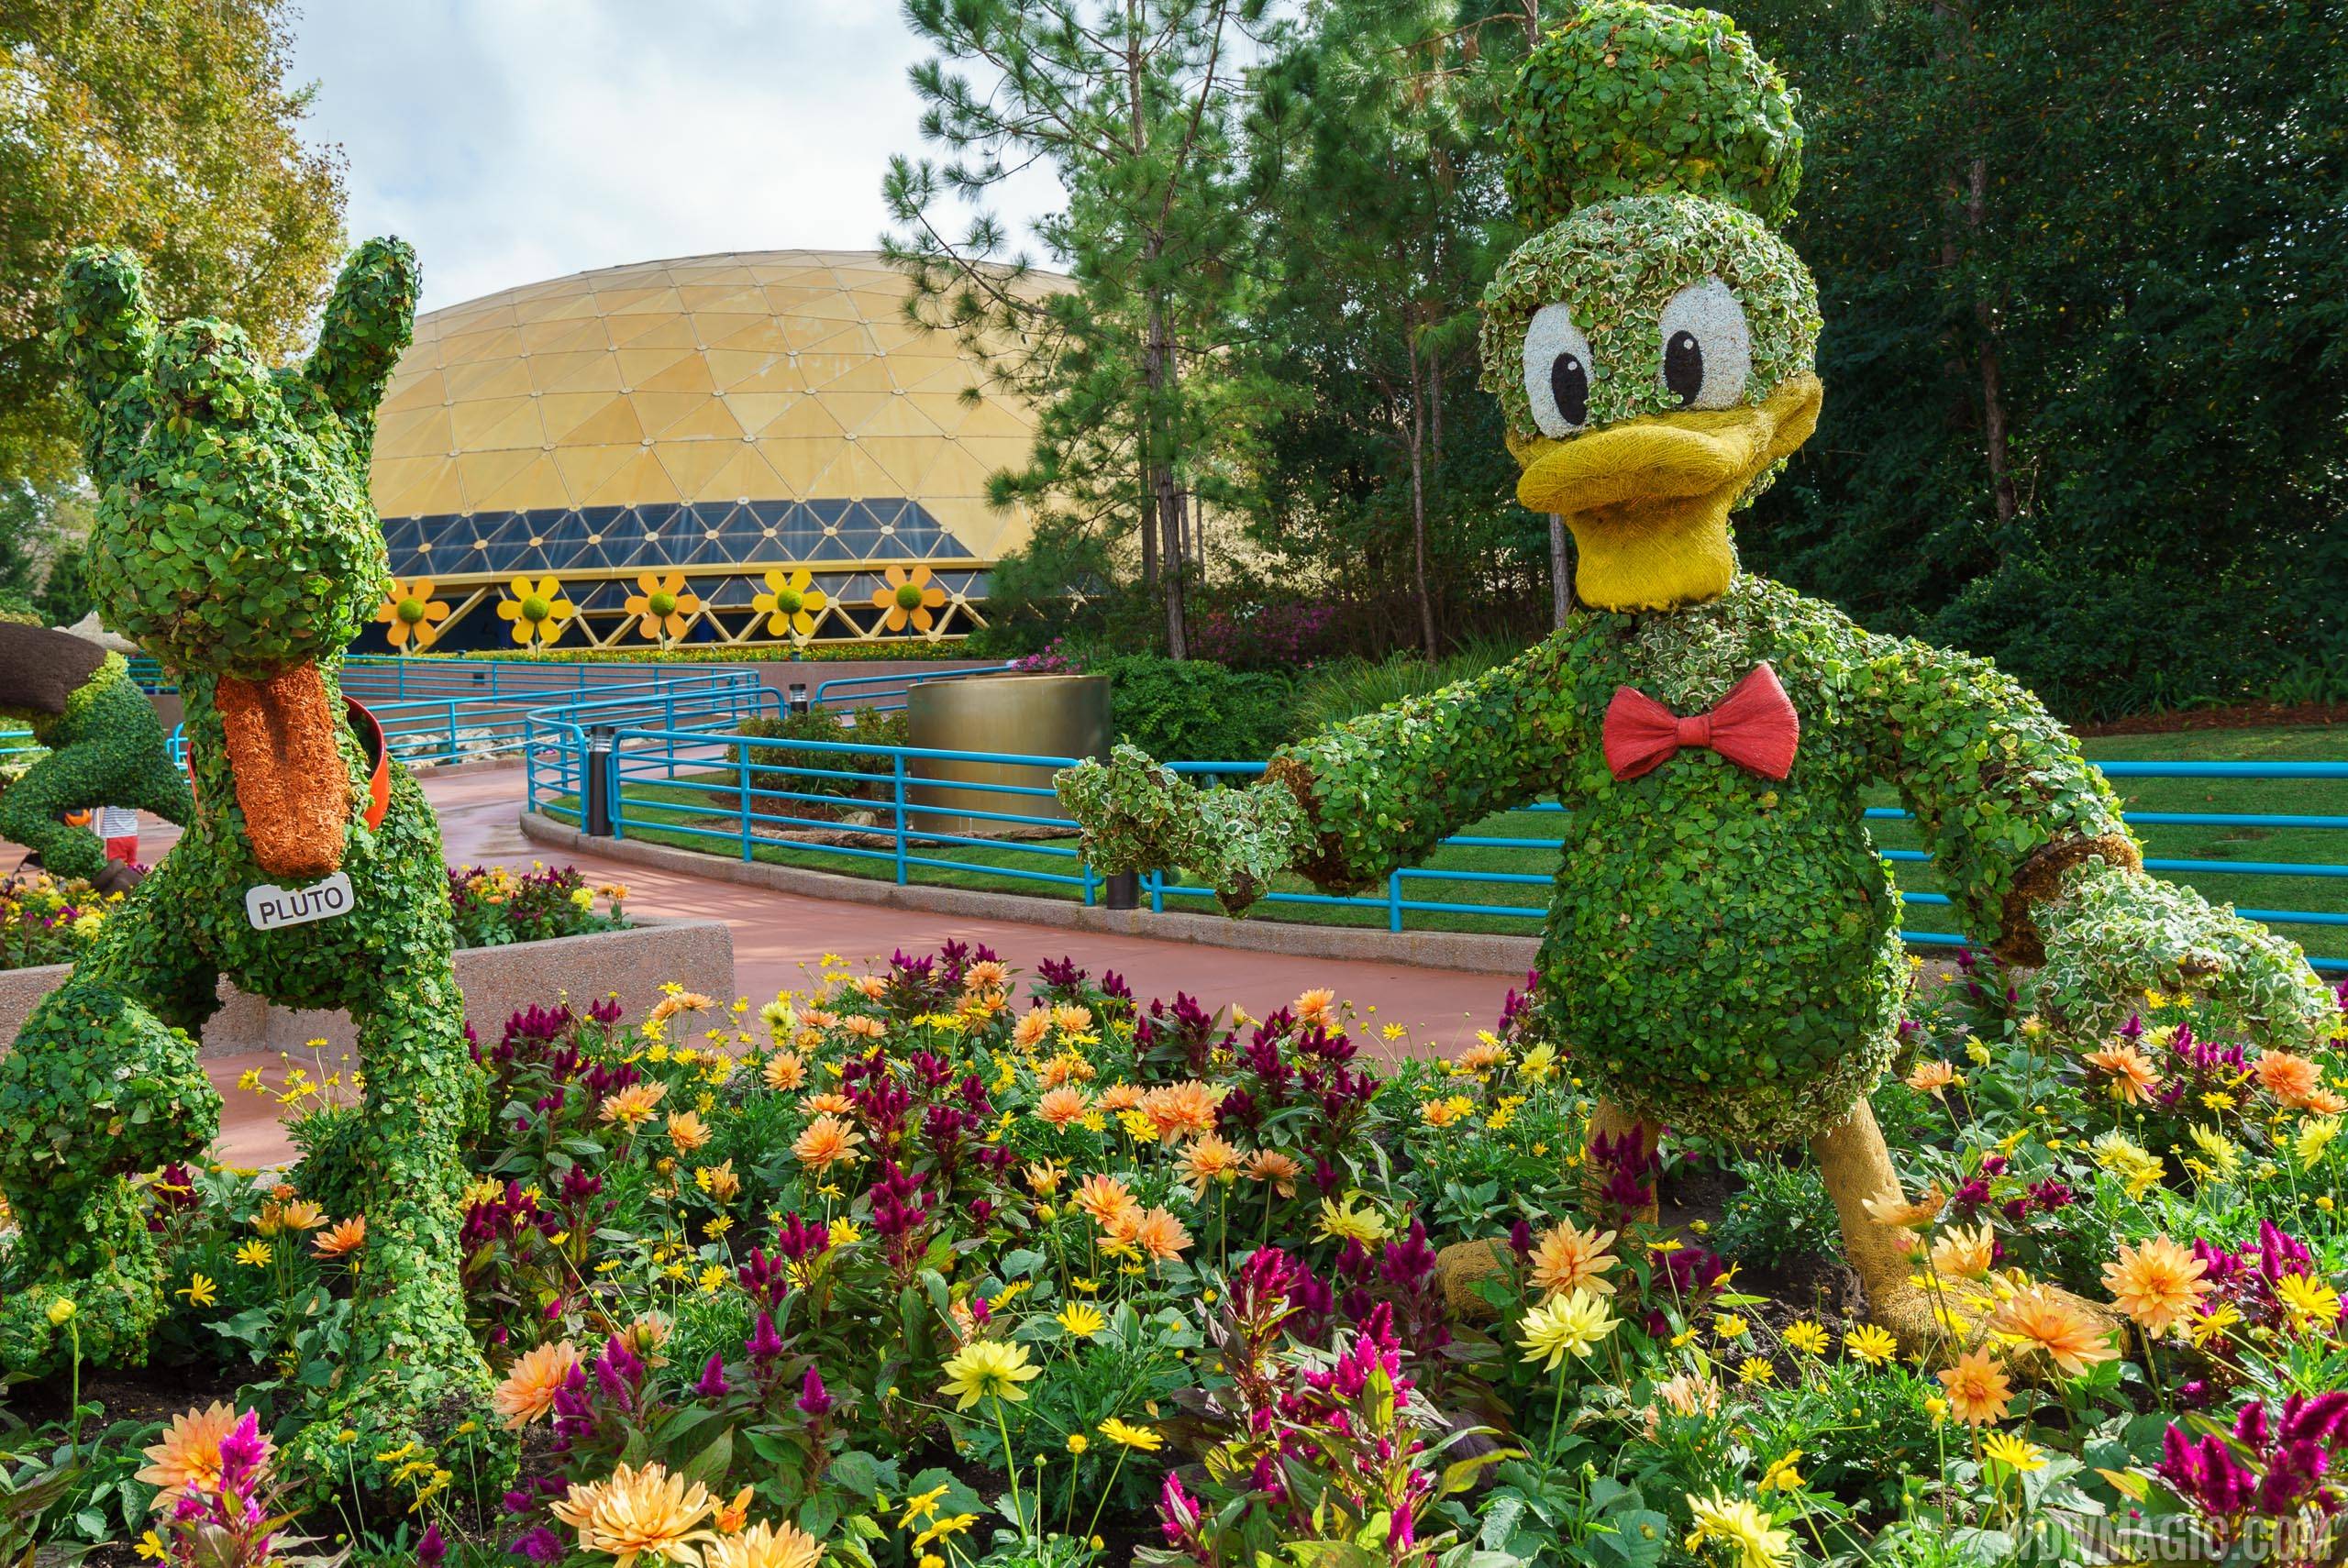 2017 Flower and Garden Festival - Donald Duck and Pluto topiaries